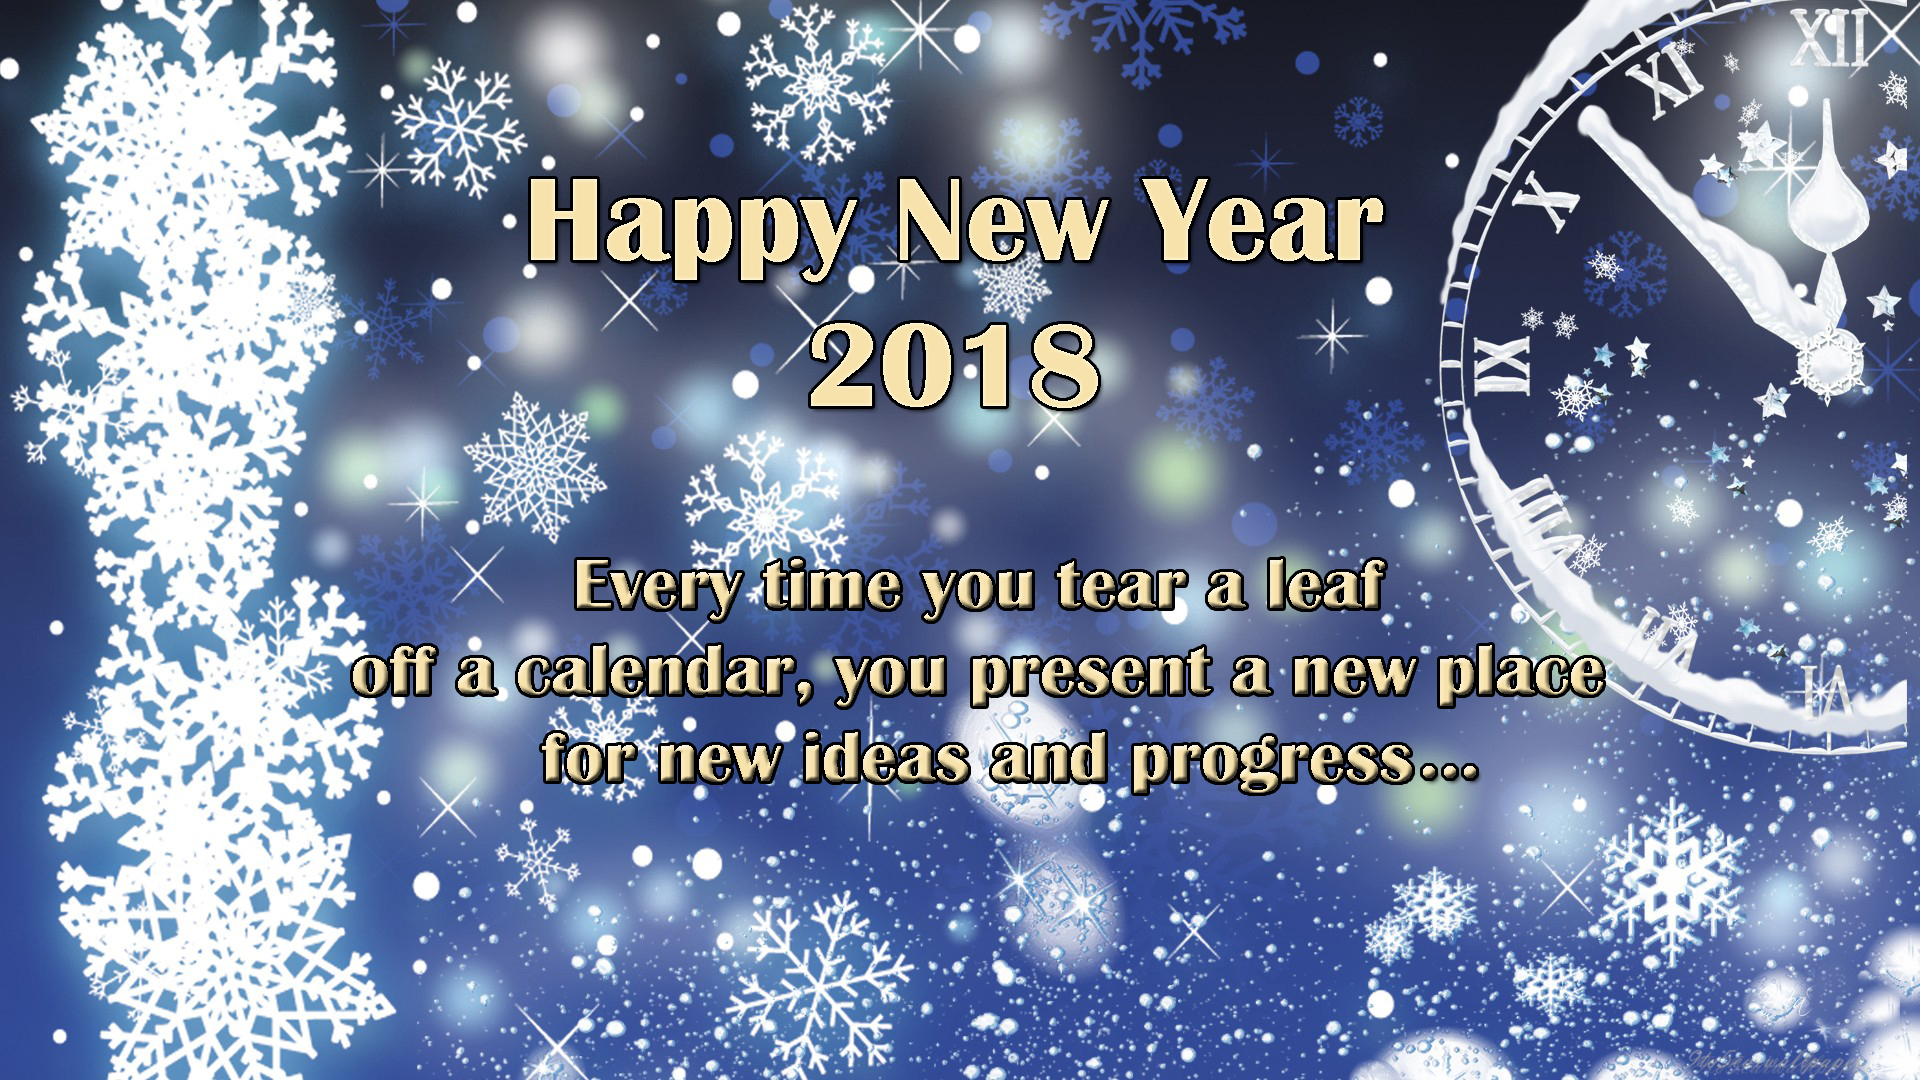 happ-new-year-quotes-wishes-images-2018